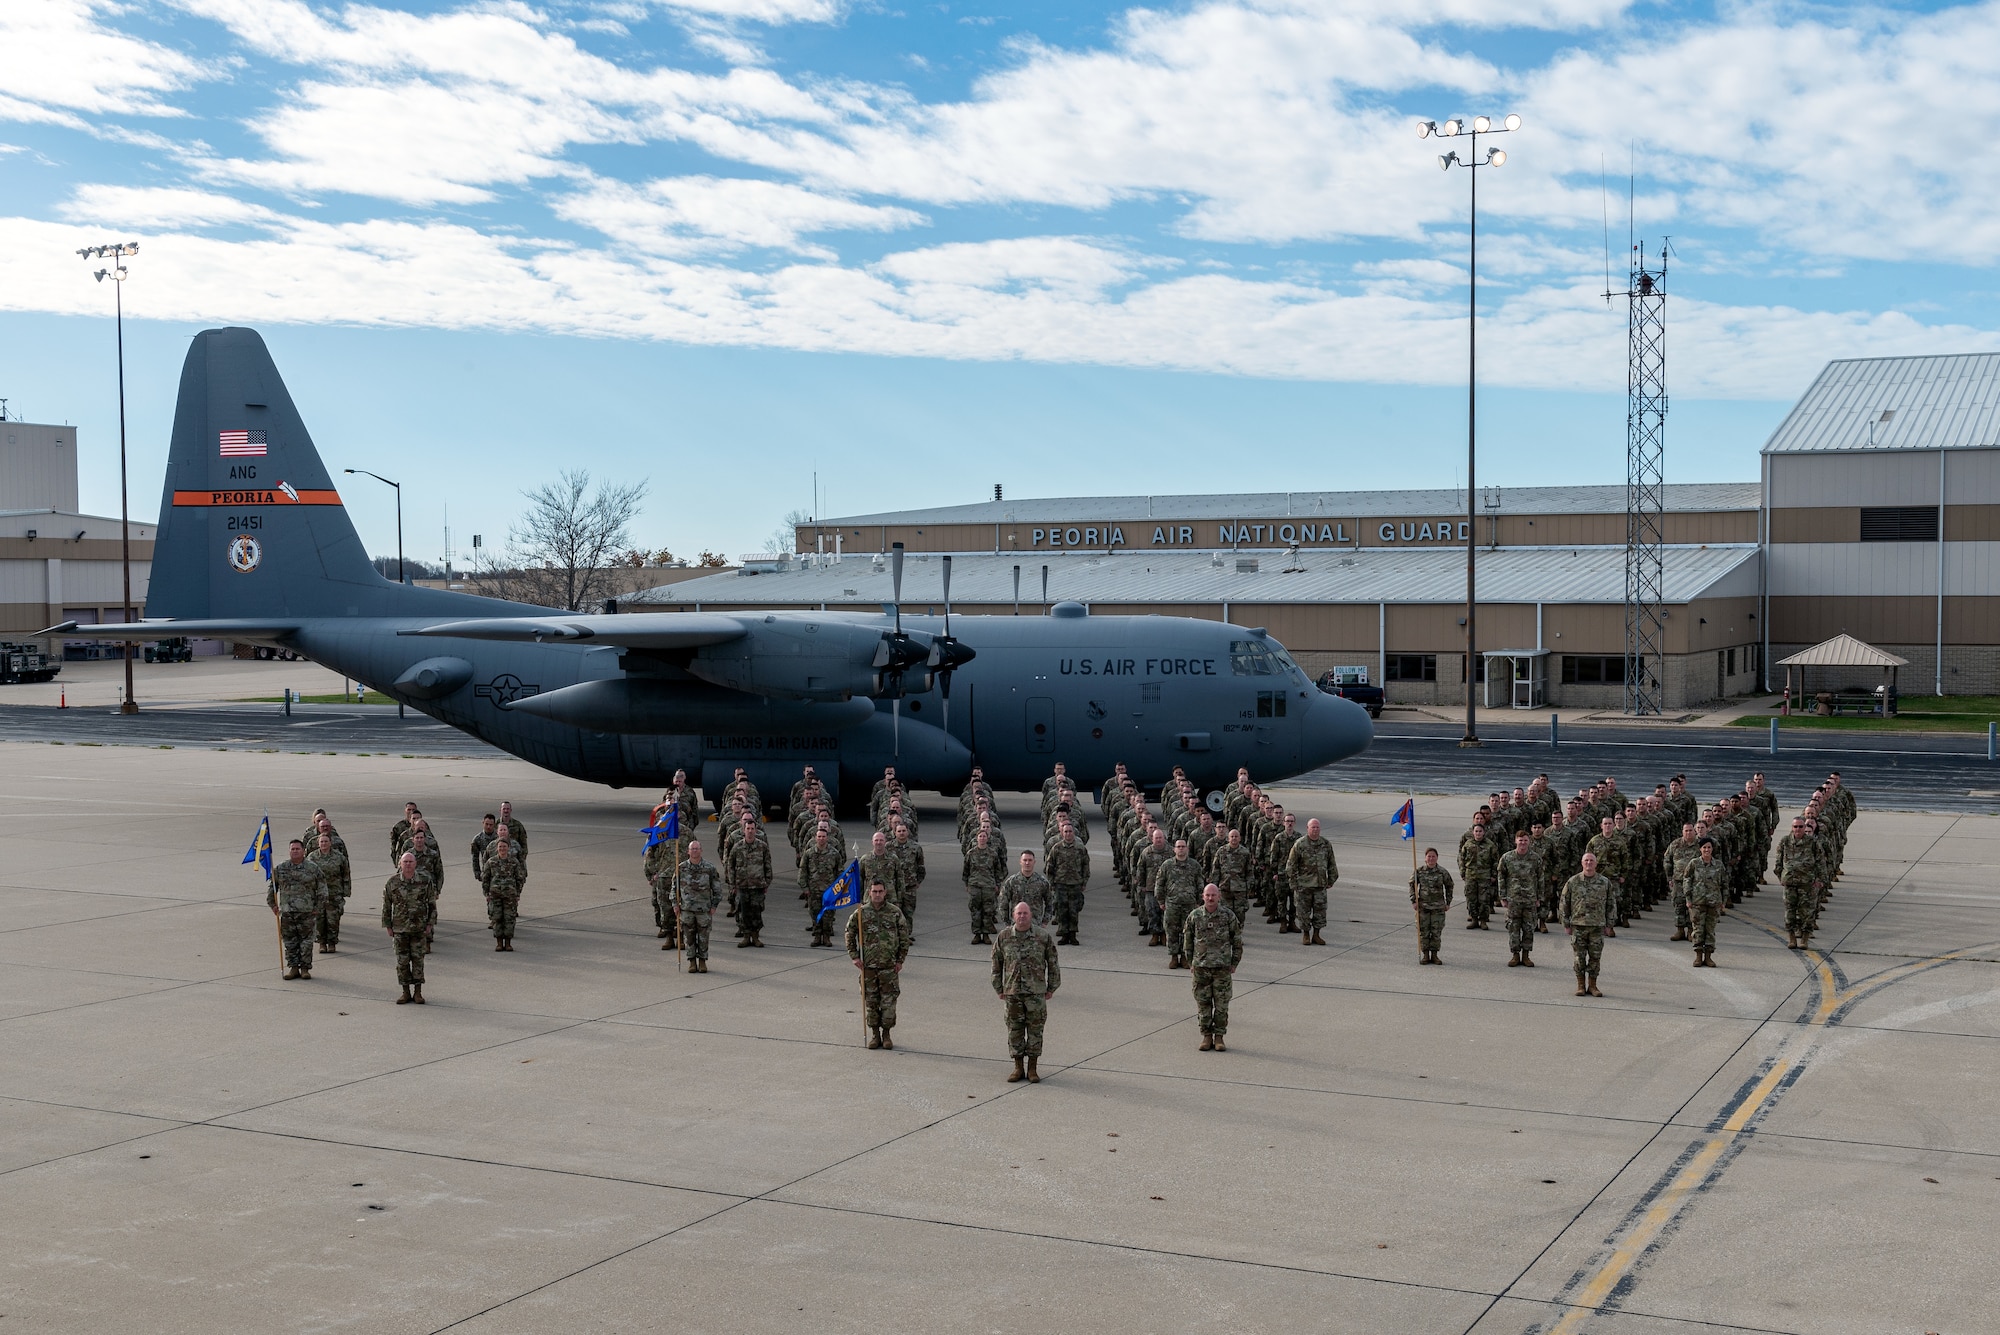 Airmen posing in front of aircraft for unit photo.